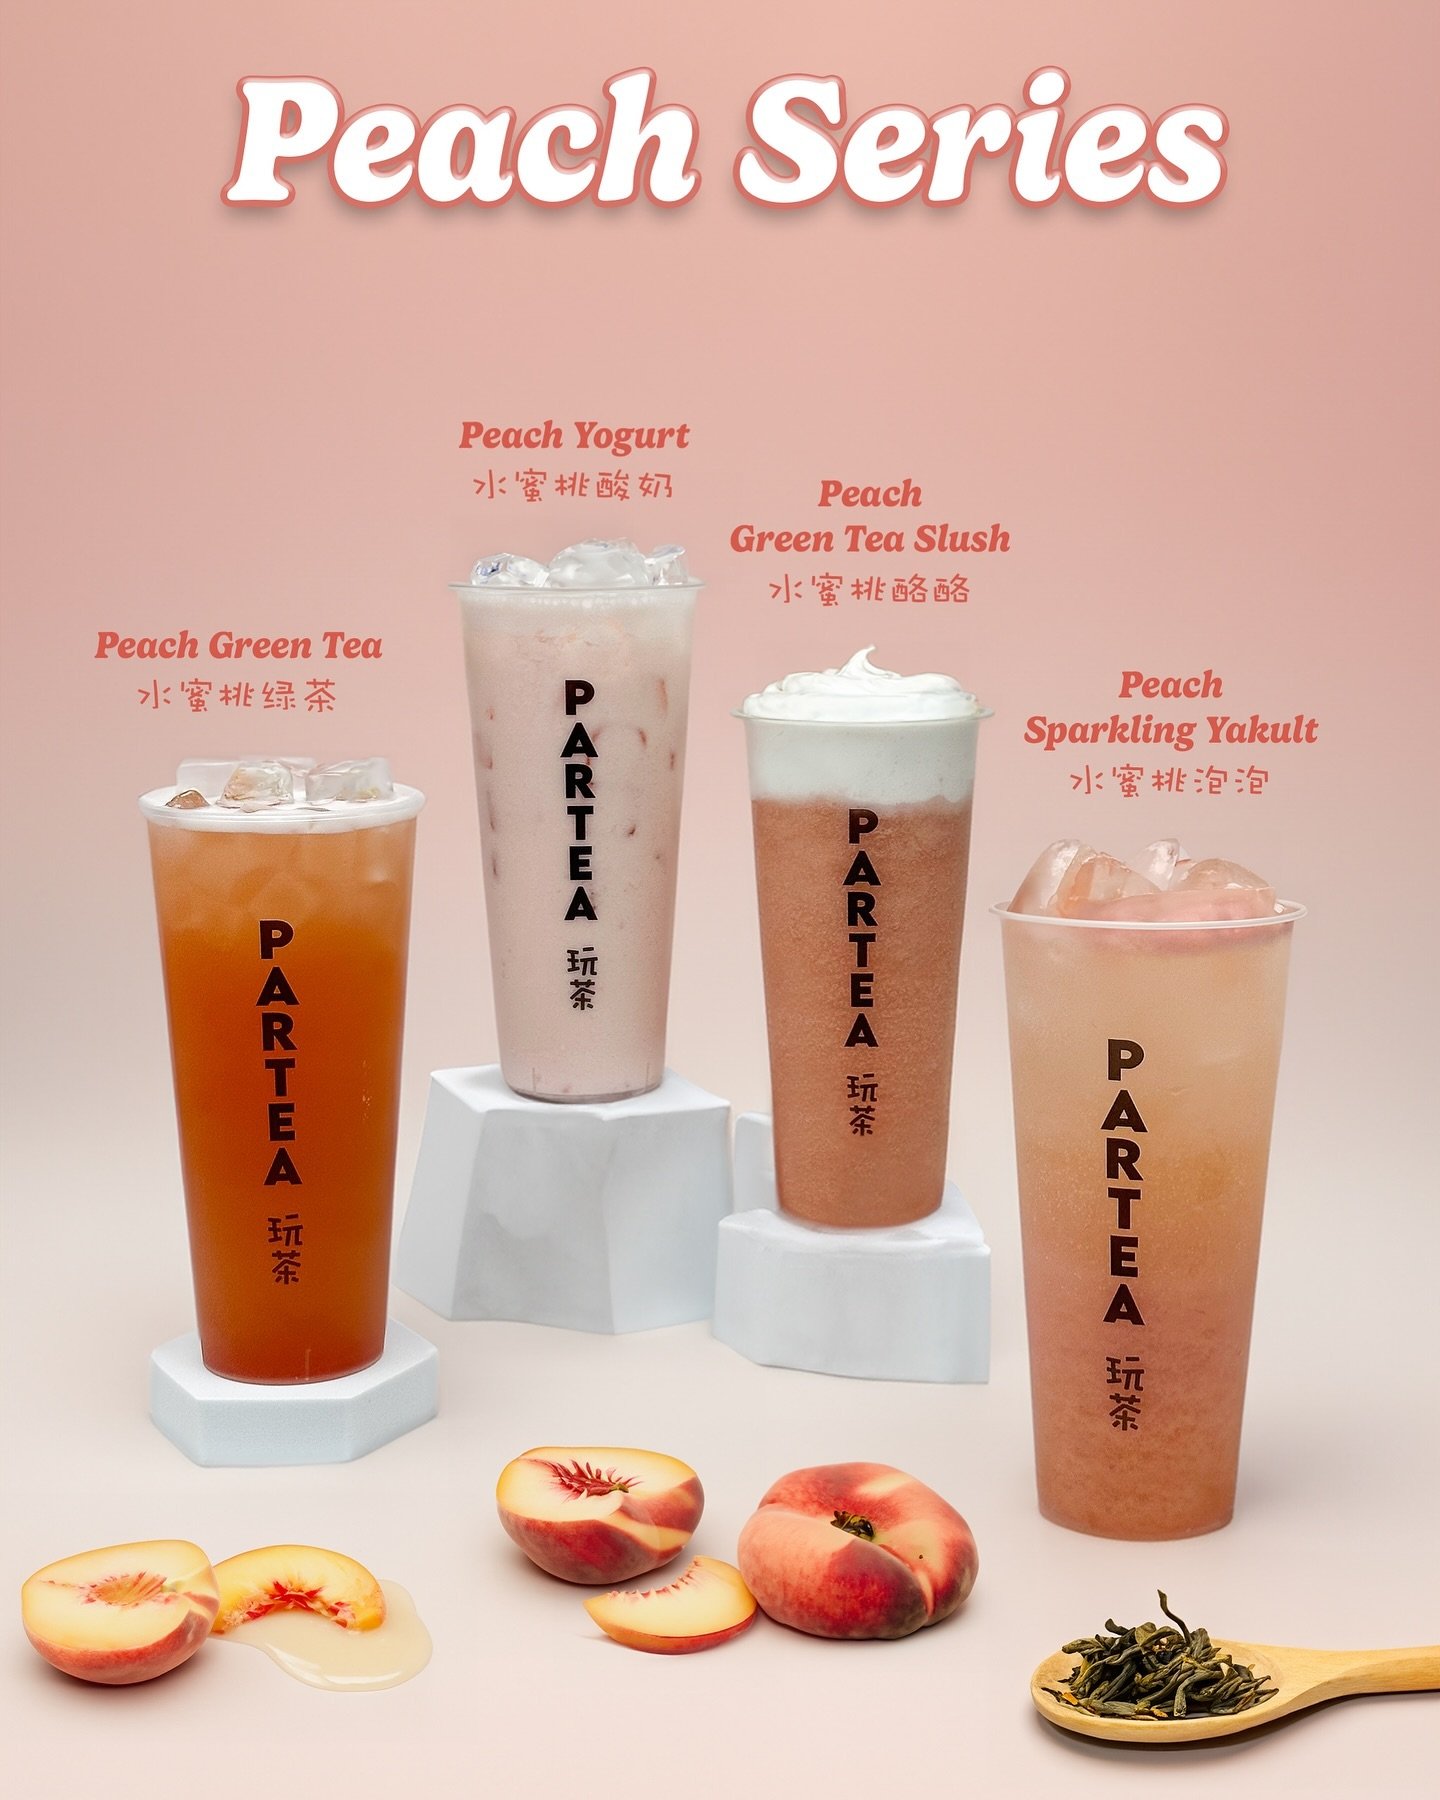 Kicking off peach picking season with our new Peach Series! 

🍑 Peach Green Tea 水蜜桃綠茶
🍑 Peach Green Teah Slush 水蜜桃酪酪
🍑 Peach Sparkling Yakult 水蜜桃泡泡
🍑 Peach Yogurt 水蜜桃酸奶

Which one will you try? 🤩

Available now in-stores and on delivery platform